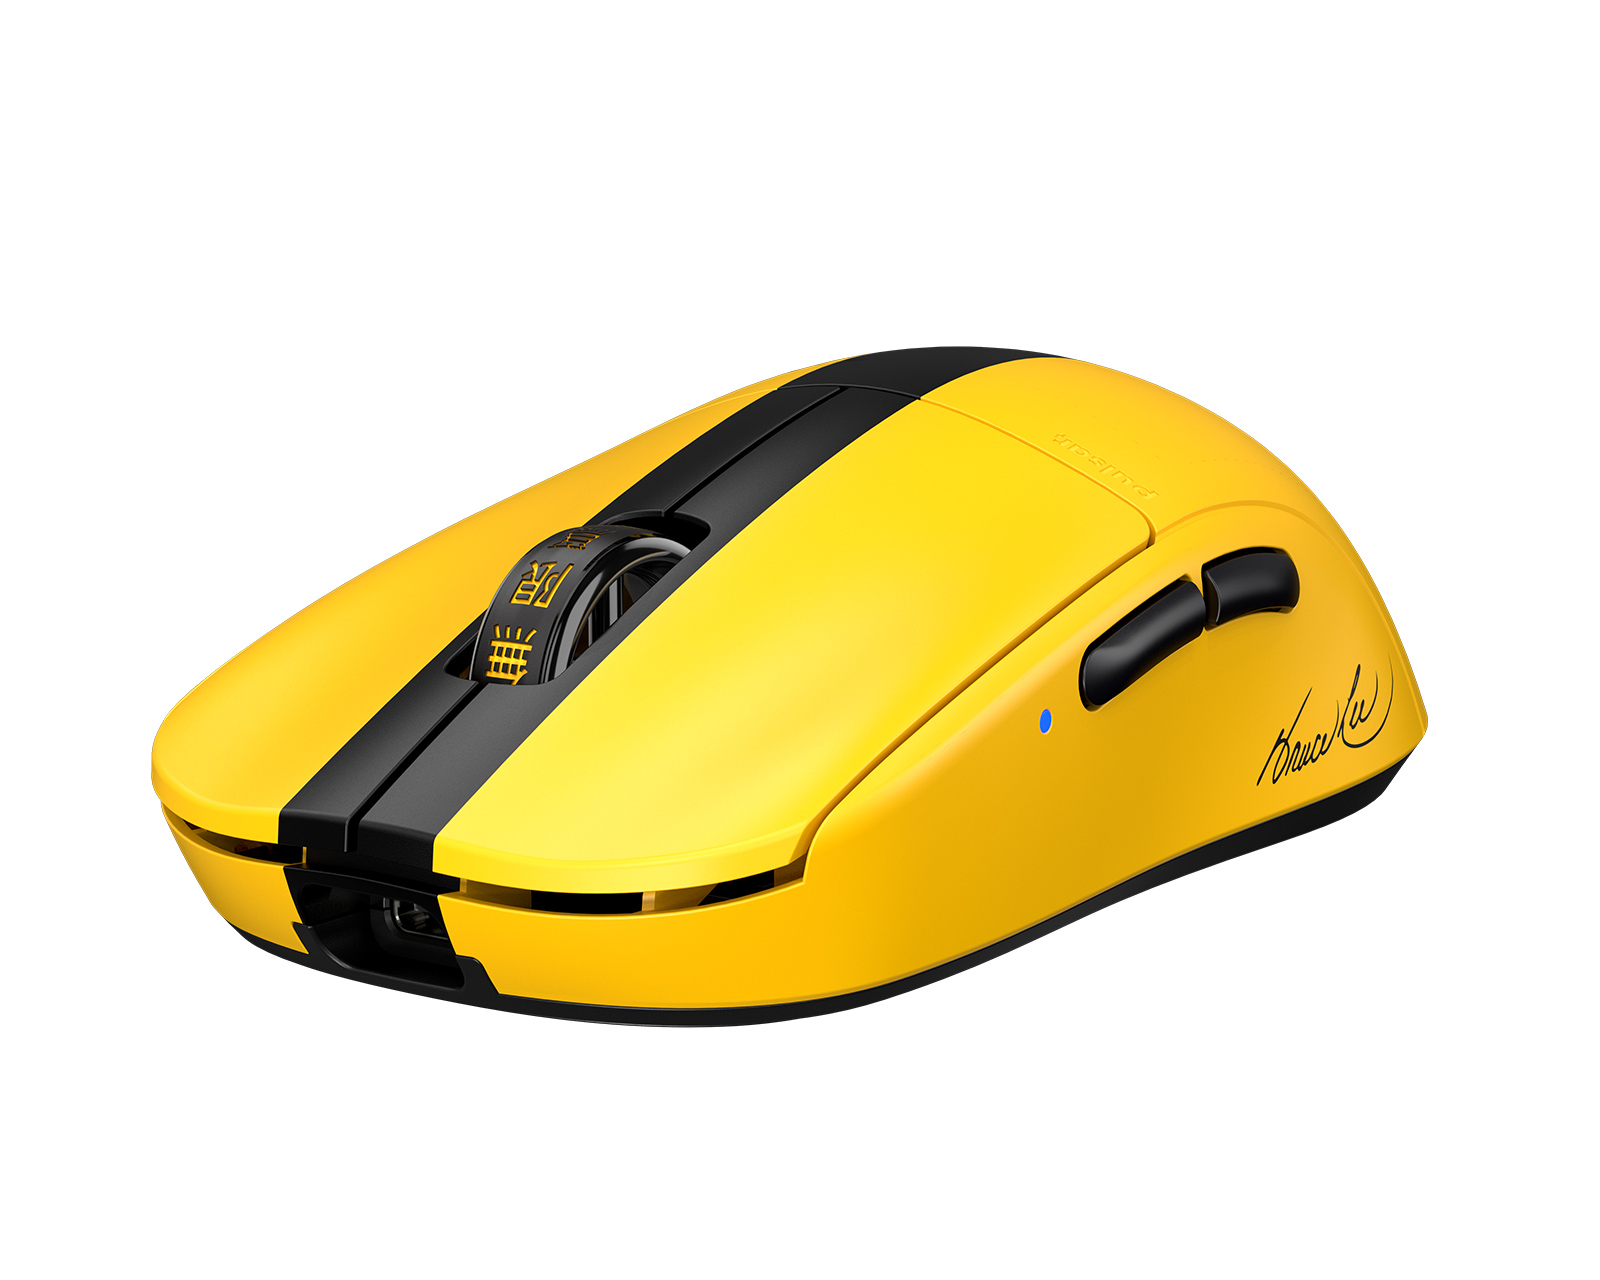 Pulsar X2 Mini Wireless Gaming Mouse - Bruce Lee Limited Edition